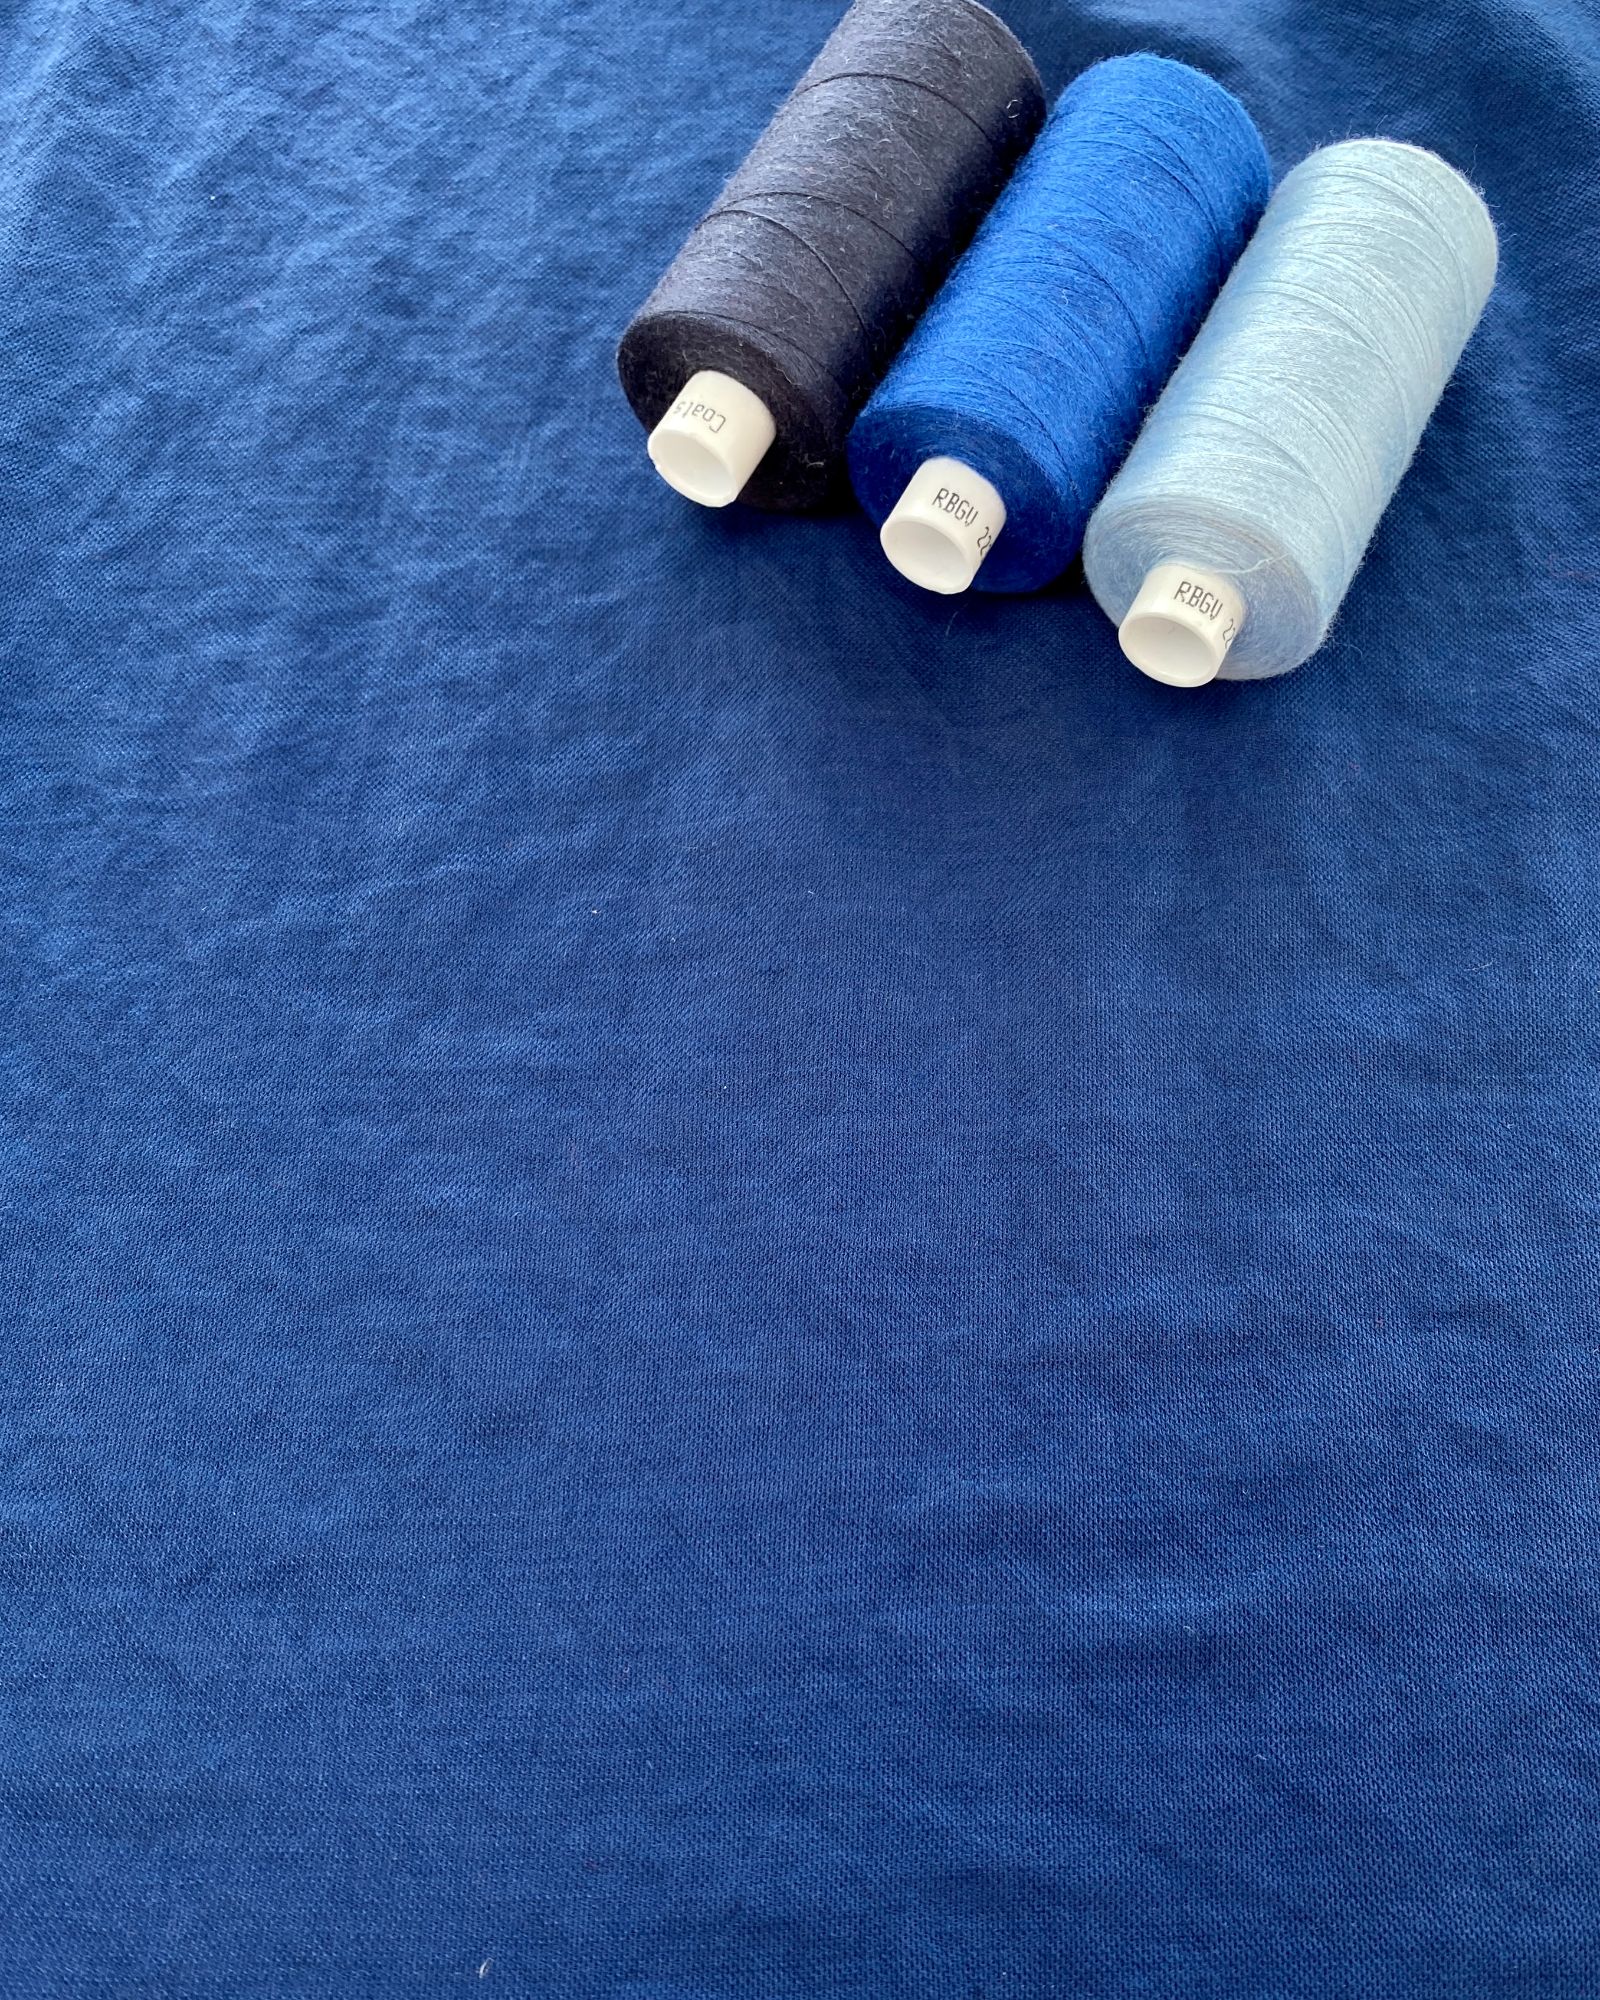 Navy fabric lain flat with three cotton reels in different shades of blue